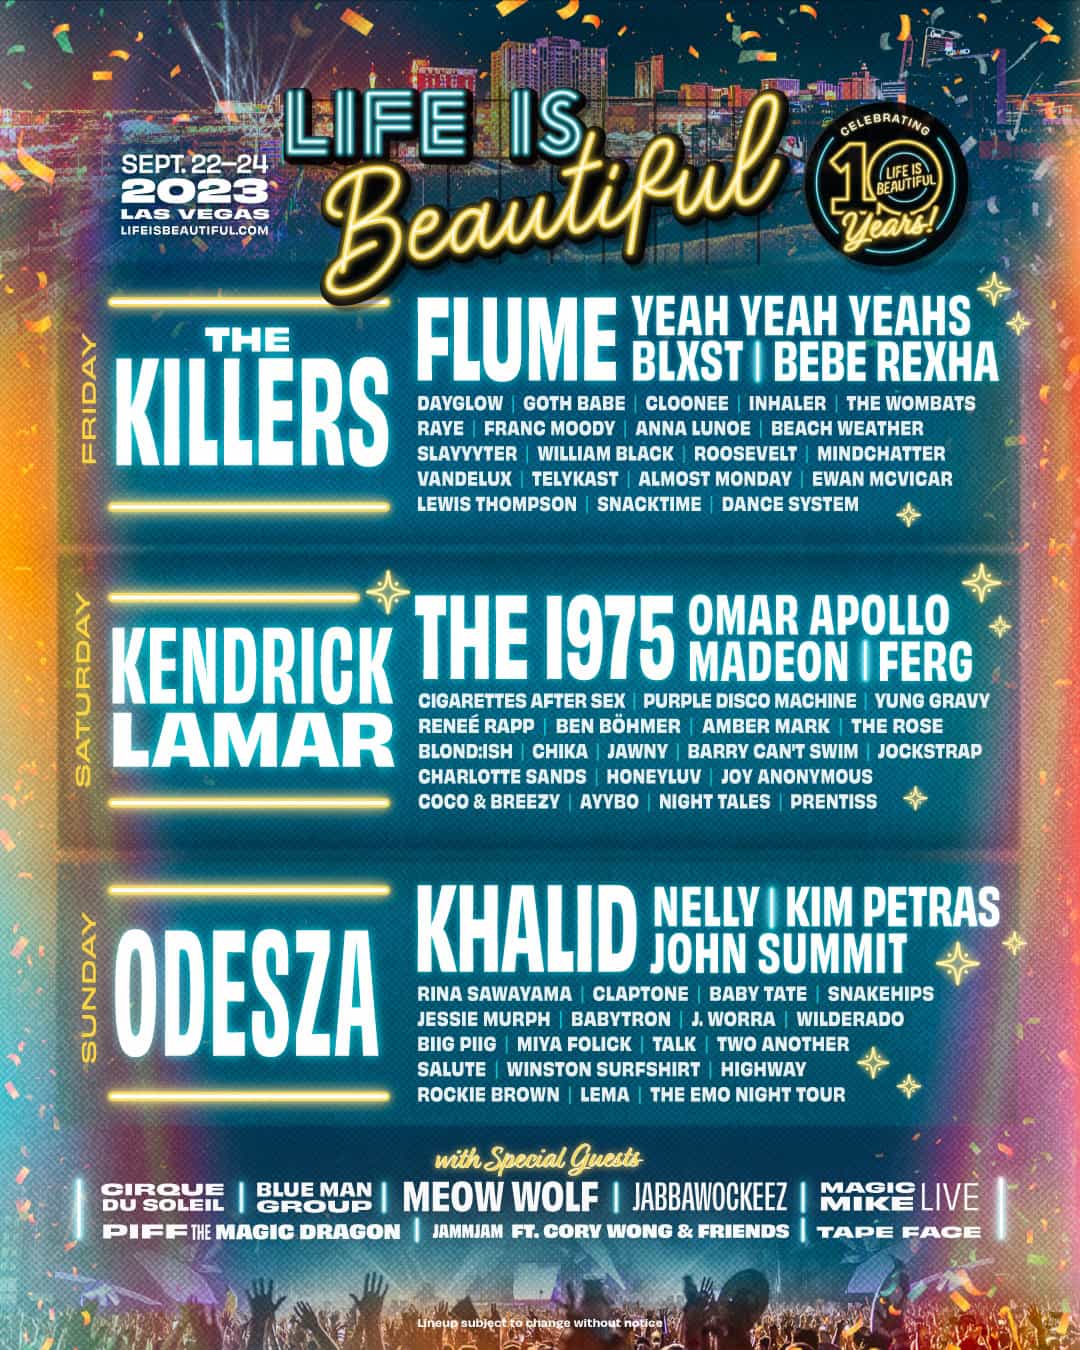 Life is Beautiful 2023 Line Up